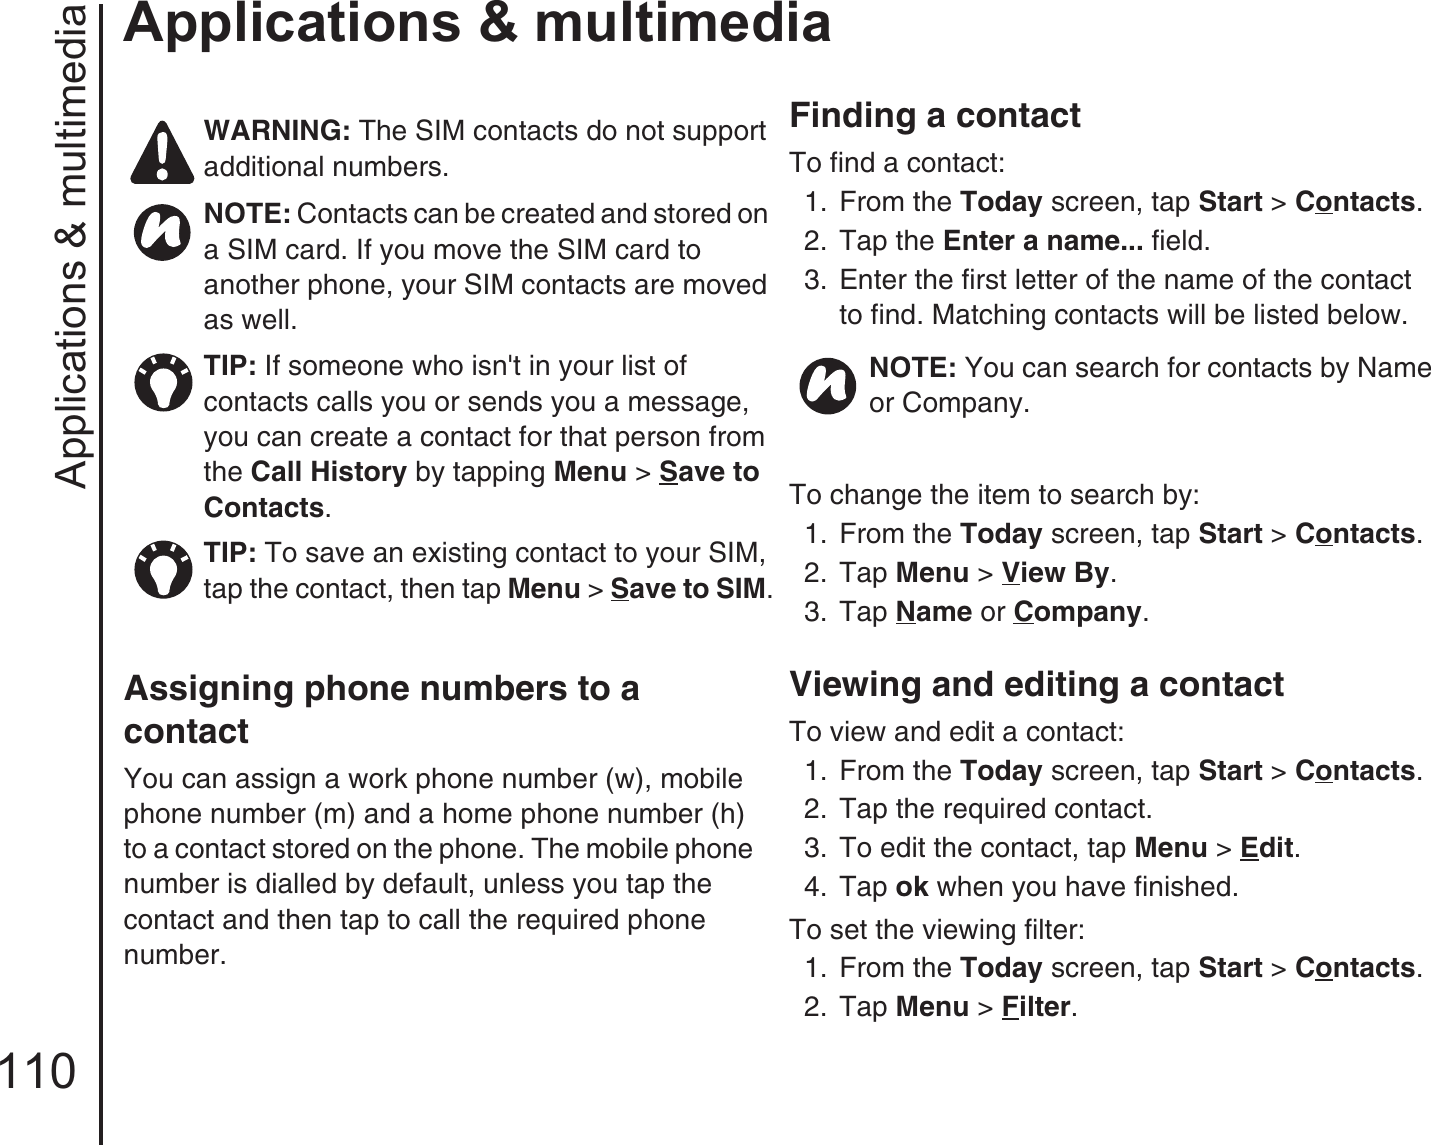 Applications &amp; multimedia110Applications &amp; multimediaAssigning phone numbers to a contact You can assign a work phone number (w), mobile phone number (m) and a home phone number (h) to a contact stored on the phone. The mobile phone number is dialled by default, unless you tap the contact and then tap to call the required phone number.Finding a contactTo find a contact:1.  From the Today screen, tap Start &gt; Contacts.2.  Tap the Enter a name... field.3.  Enter the first letter of the name of the contact to find. Matching contacts will be listed below.To change the item to search by:1. From the Today screen, tap Start &gt; Contacts.2.  Tap Menu &gt; View By.3.  Tap Name or Company.Viewing and editing a contactTo view and edit a contact:1.  From the Today screen, tap Start &gt; Contacts.2.  Tap the required contact.3.  To edit the contact, tap Menu &gt; Edit.4.  Tap ok when you have finished.To set the viewing filter:1. From the Today screen, tap Start &gt; Contacts.2.  Tap Menu &gt; Filter.WARNING: The SIM contacts do not support additional numbers.NOTE: Contacts can be created and stored on a SIM card. If you move the SIM card to another phone, your SIM contacts are moved as well.TIP: If someone who isn&apos;t in your list of contacts calls you or sends you a message, you can create a contact for that person from the Call History by tapping Menu &gt; Save to Contacts. TIP: To save an existing contact to your SIM, tap the contact, then tap Menu &gt; Save to SIM.NOTE: You can search for contacts by Name or Company.